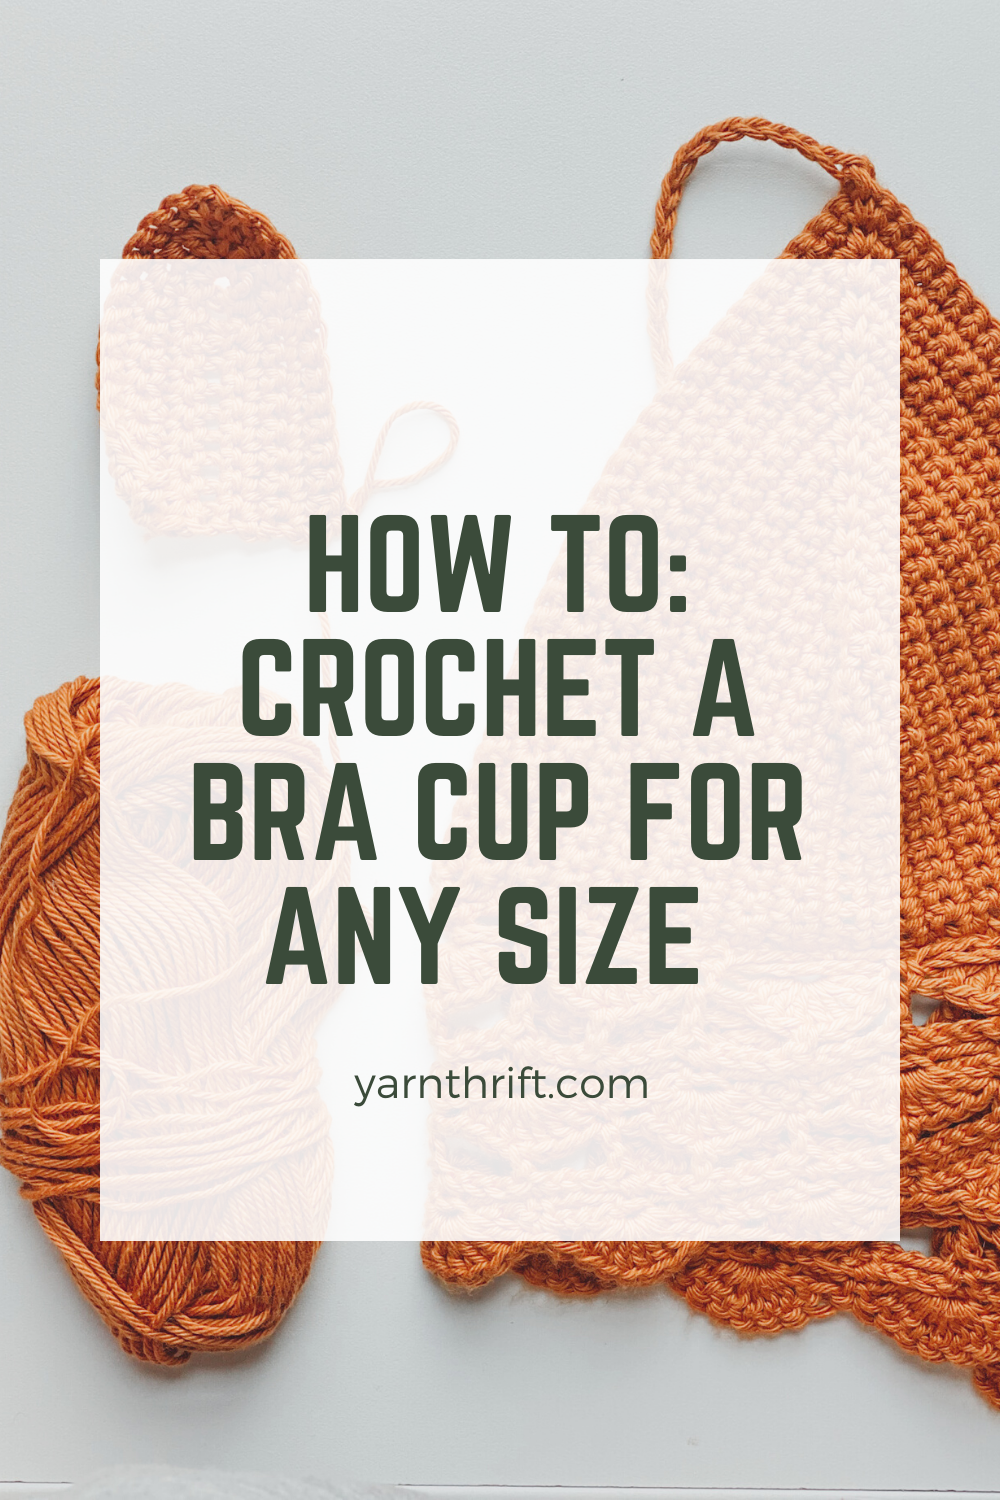 I Made a bra cup crochet written patten with measurements and helpful , crochet